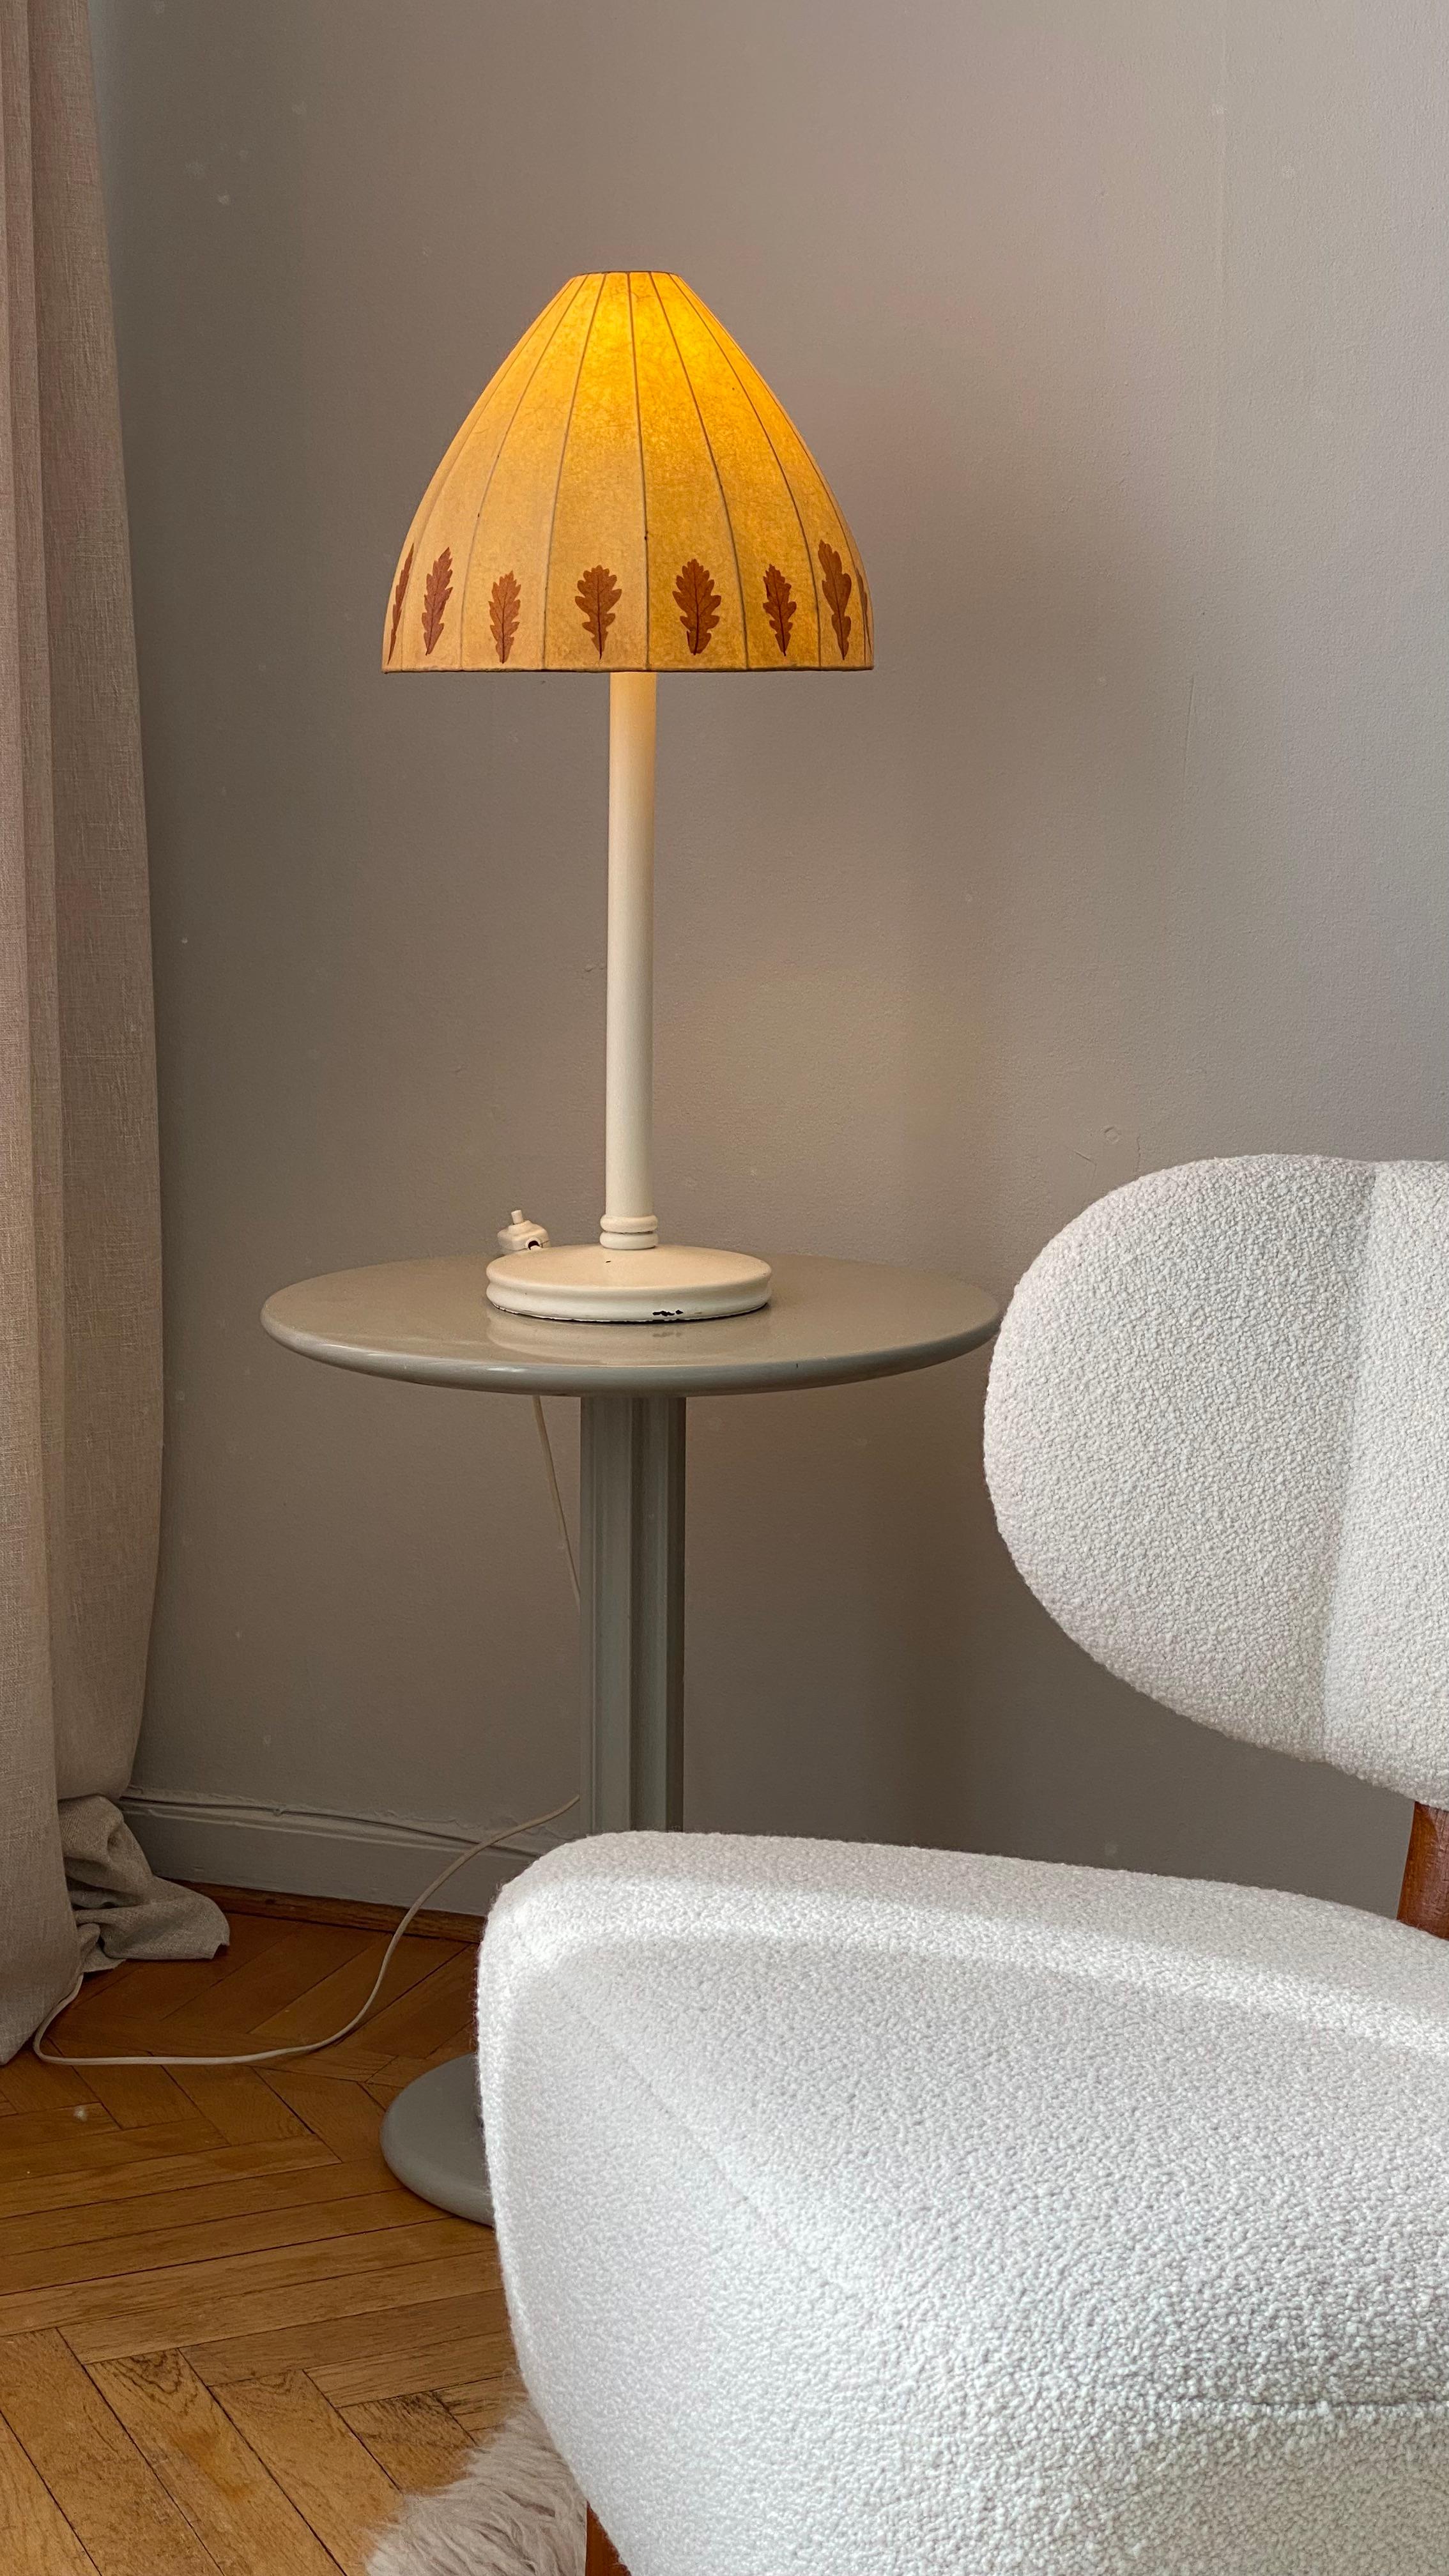 This unusual table lamp by Hans-Agne Jakobsson is a unique product with a white painted wooden base and a shade made of resin-like material, decorated with real leaves. It gives a fantastic glow and is definitely an unusual and beautiful addition to